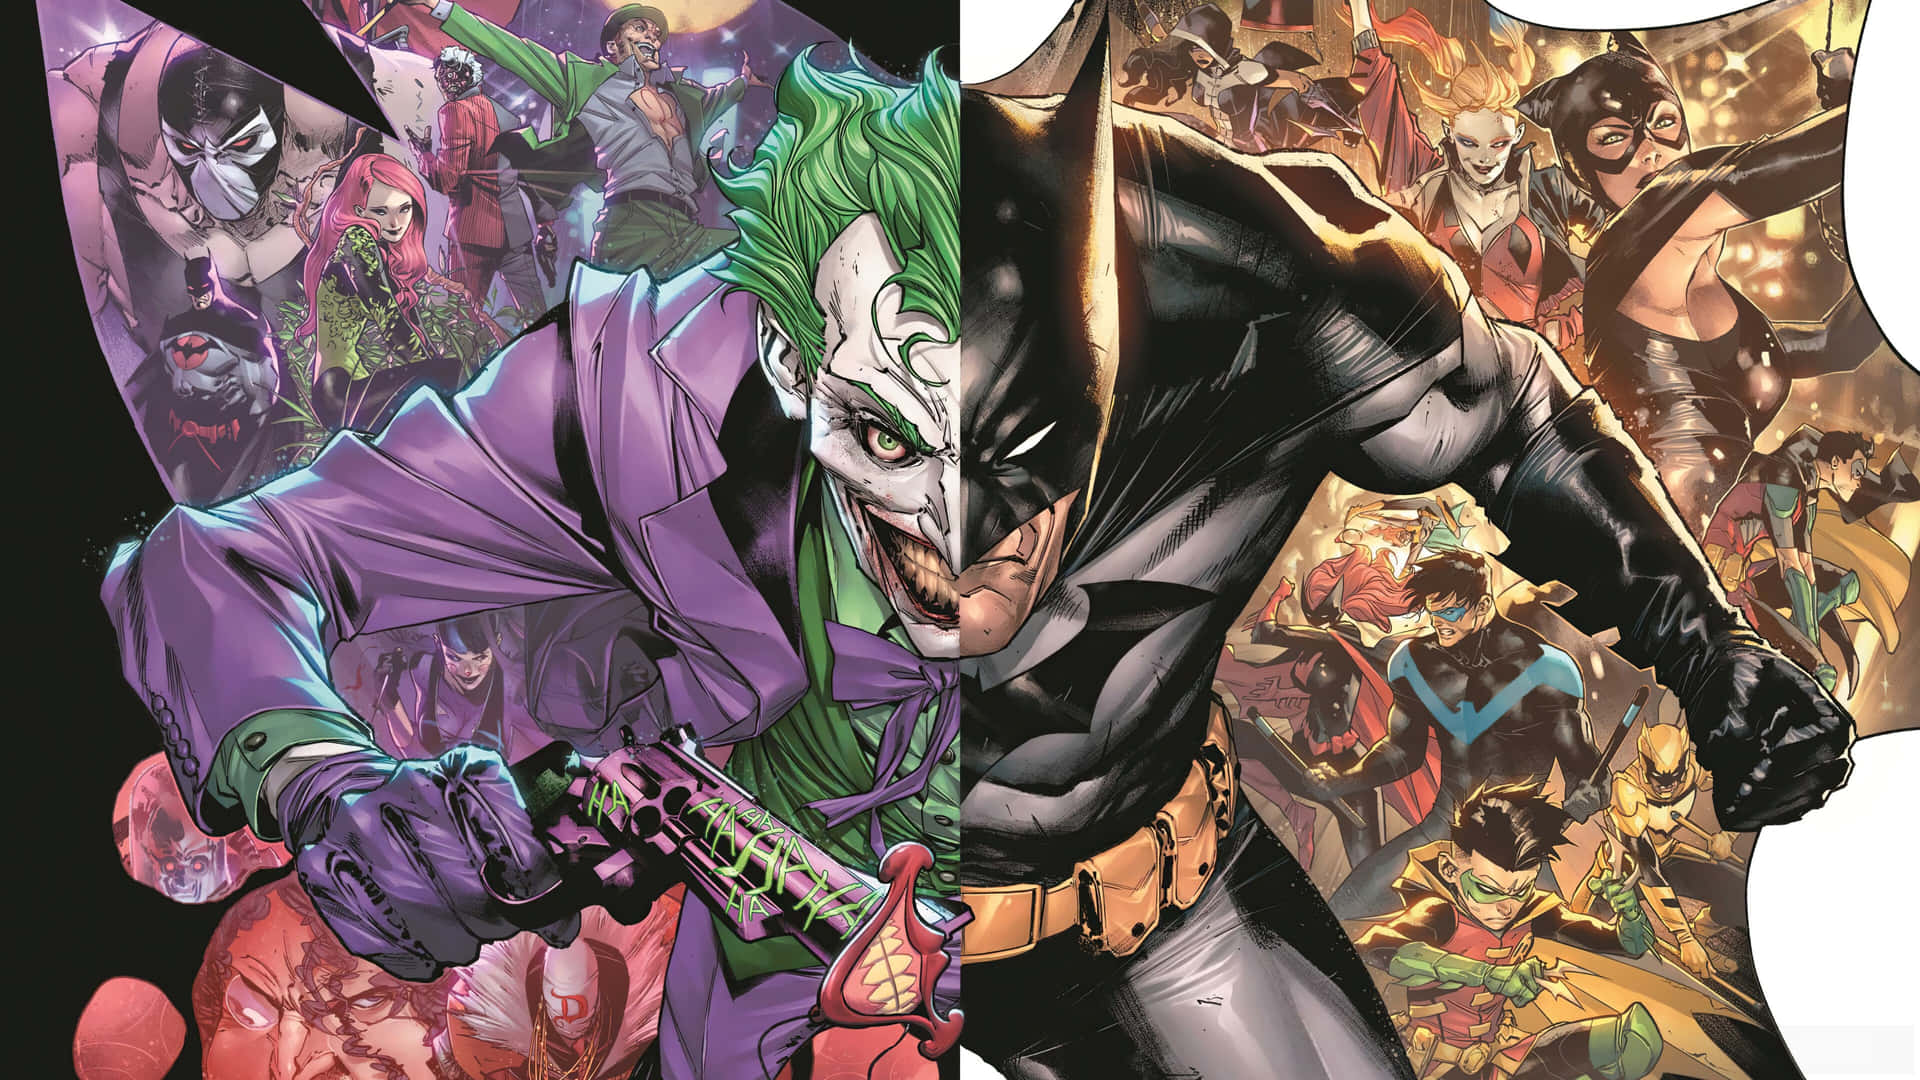 Cool Joker Cover With Batman Background